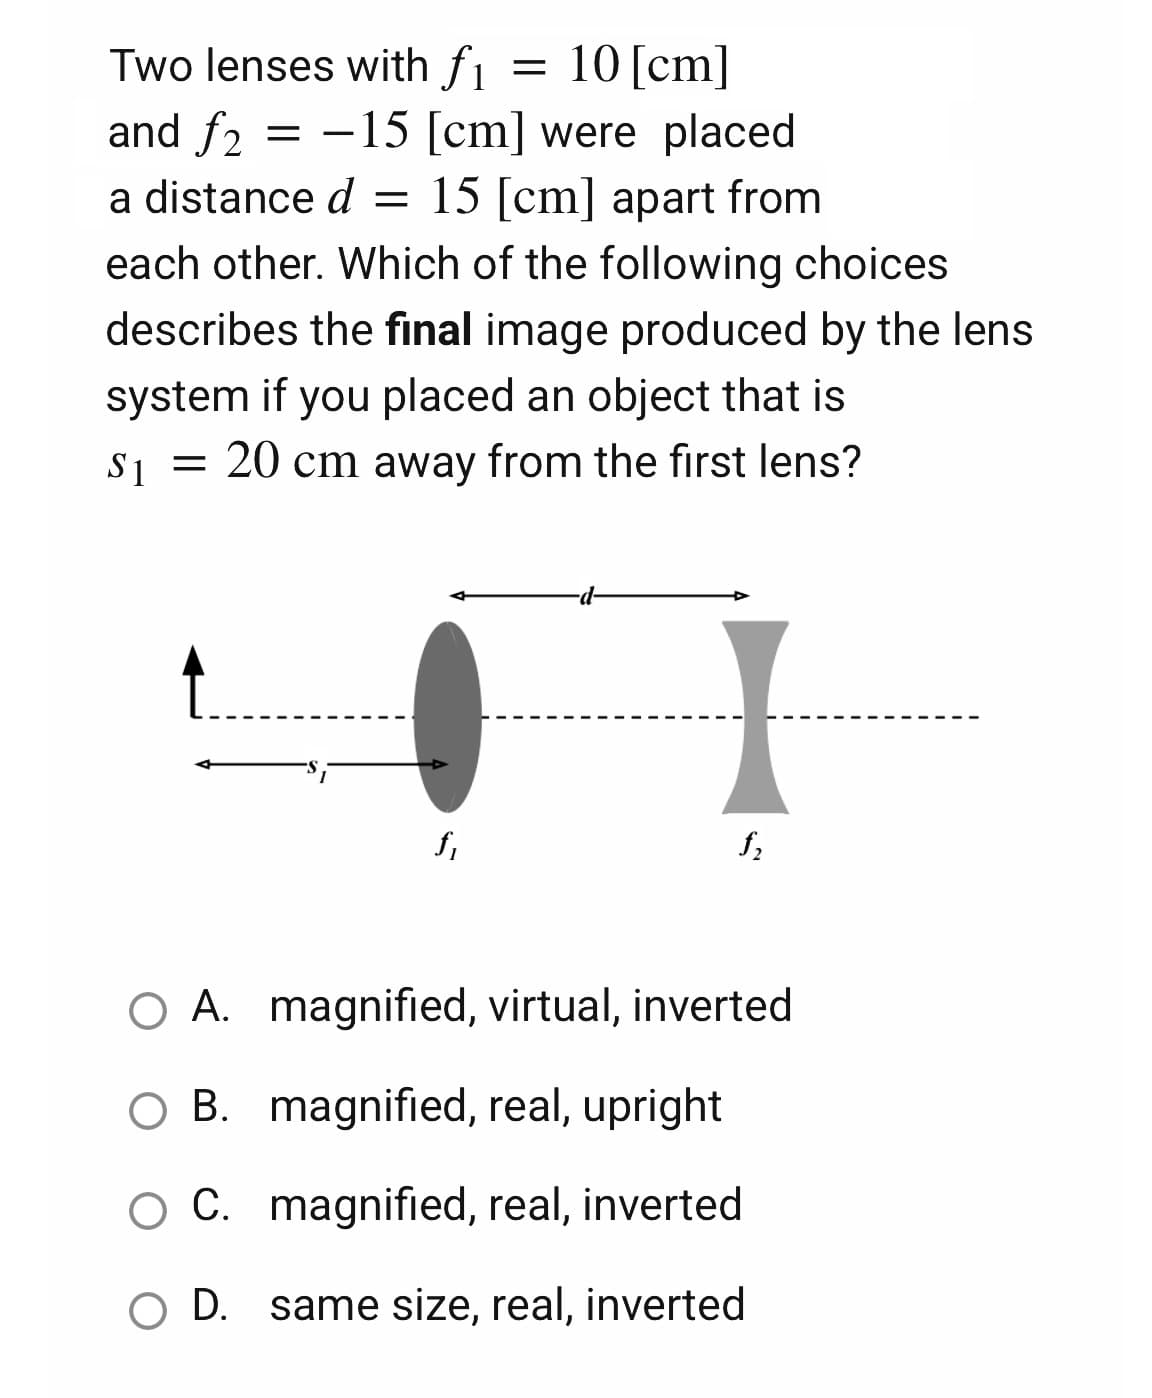 Two lenses with fi
=
10 [cm]
and f2 = -15 [cm] were placed
a distance d = 15 [cm] apart from
each other. Which of the following choices
describes the final image produced by the lens
system if you placed an object that is
$₁ = 20 cm away from the first lens?
$1
f₁
f₂
O A.
magnified, virtual, inverted
O B. magnified, real, upright
C. magnified, real, inverted
O D. same size, real, inverted